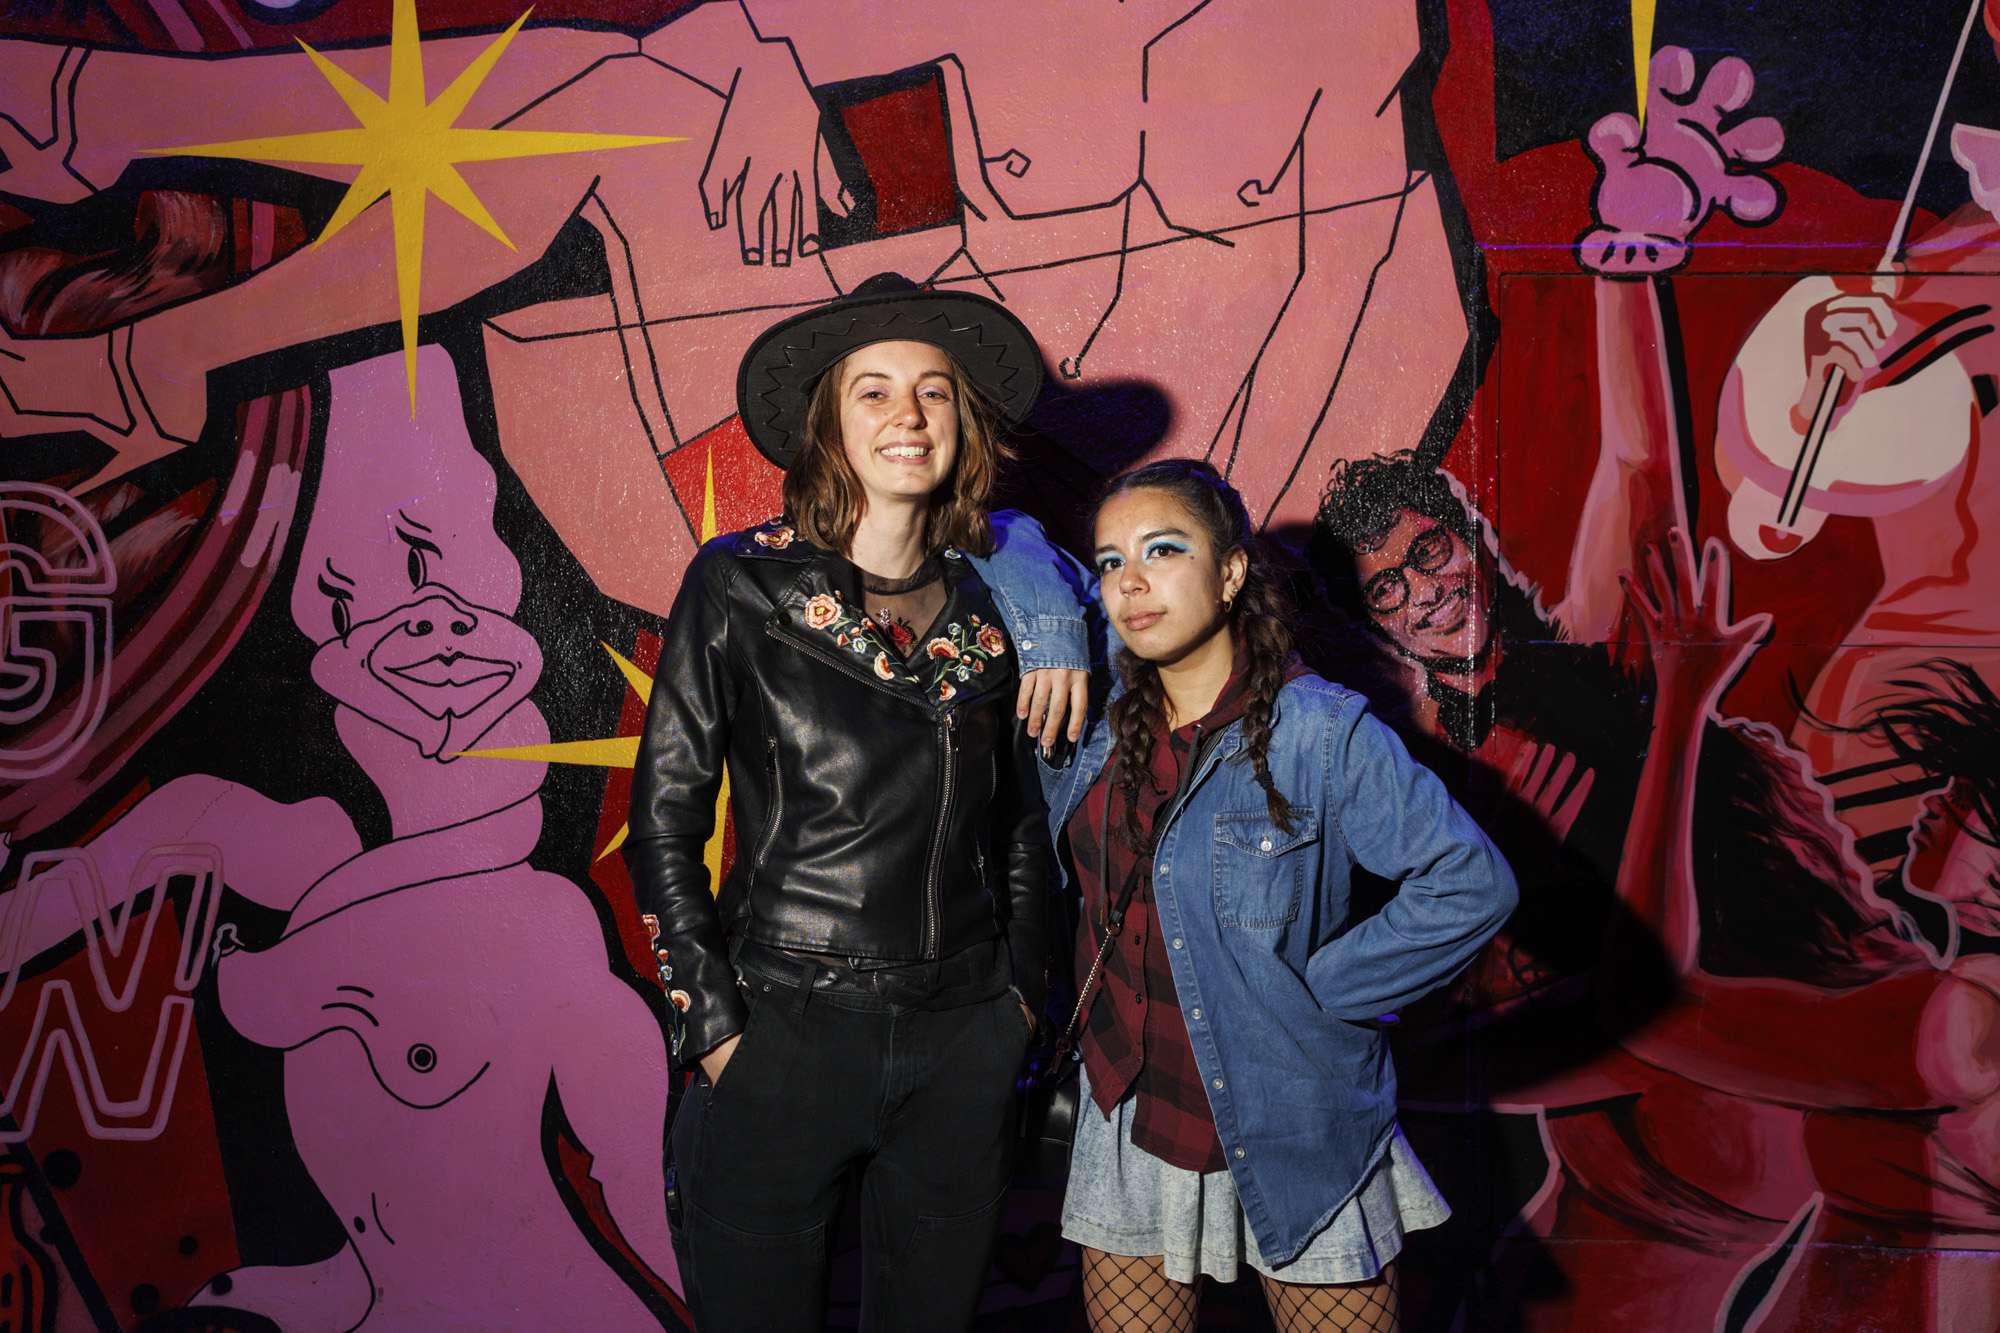 A smiling woman wearing a wide brimmed black hat and leather jacket stands with a shorter woman wearing her hair in braids and a short skirt. They are standing before a pink and red mural.